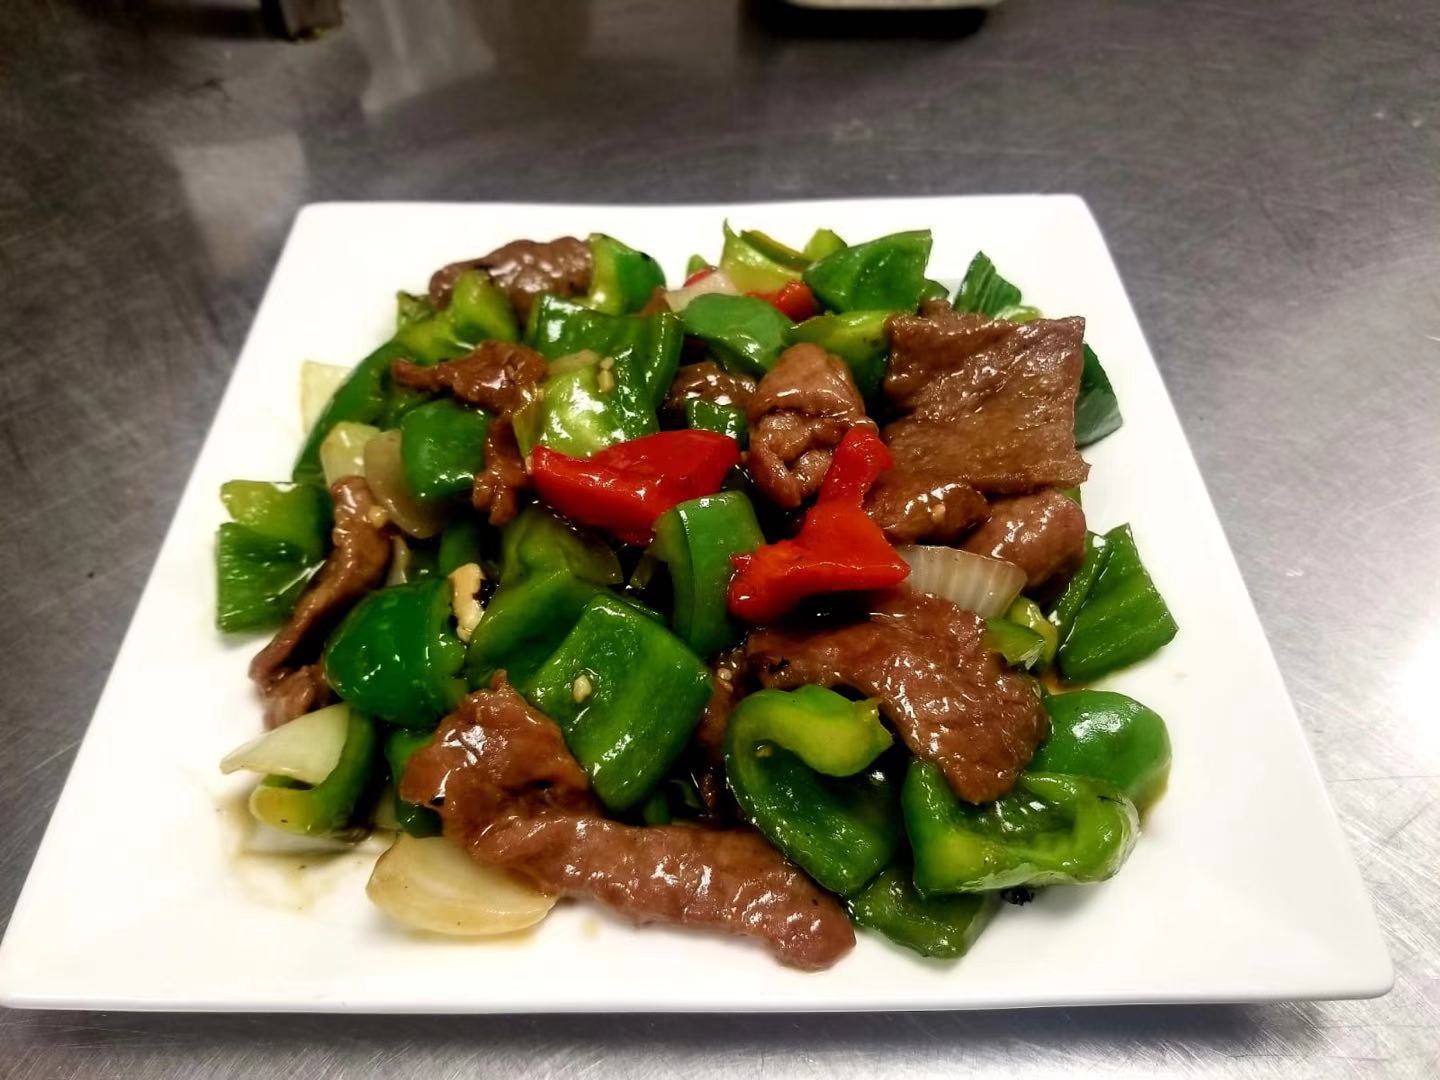 173. Sliced Beef with Green Pepper and Black Bean Sauce